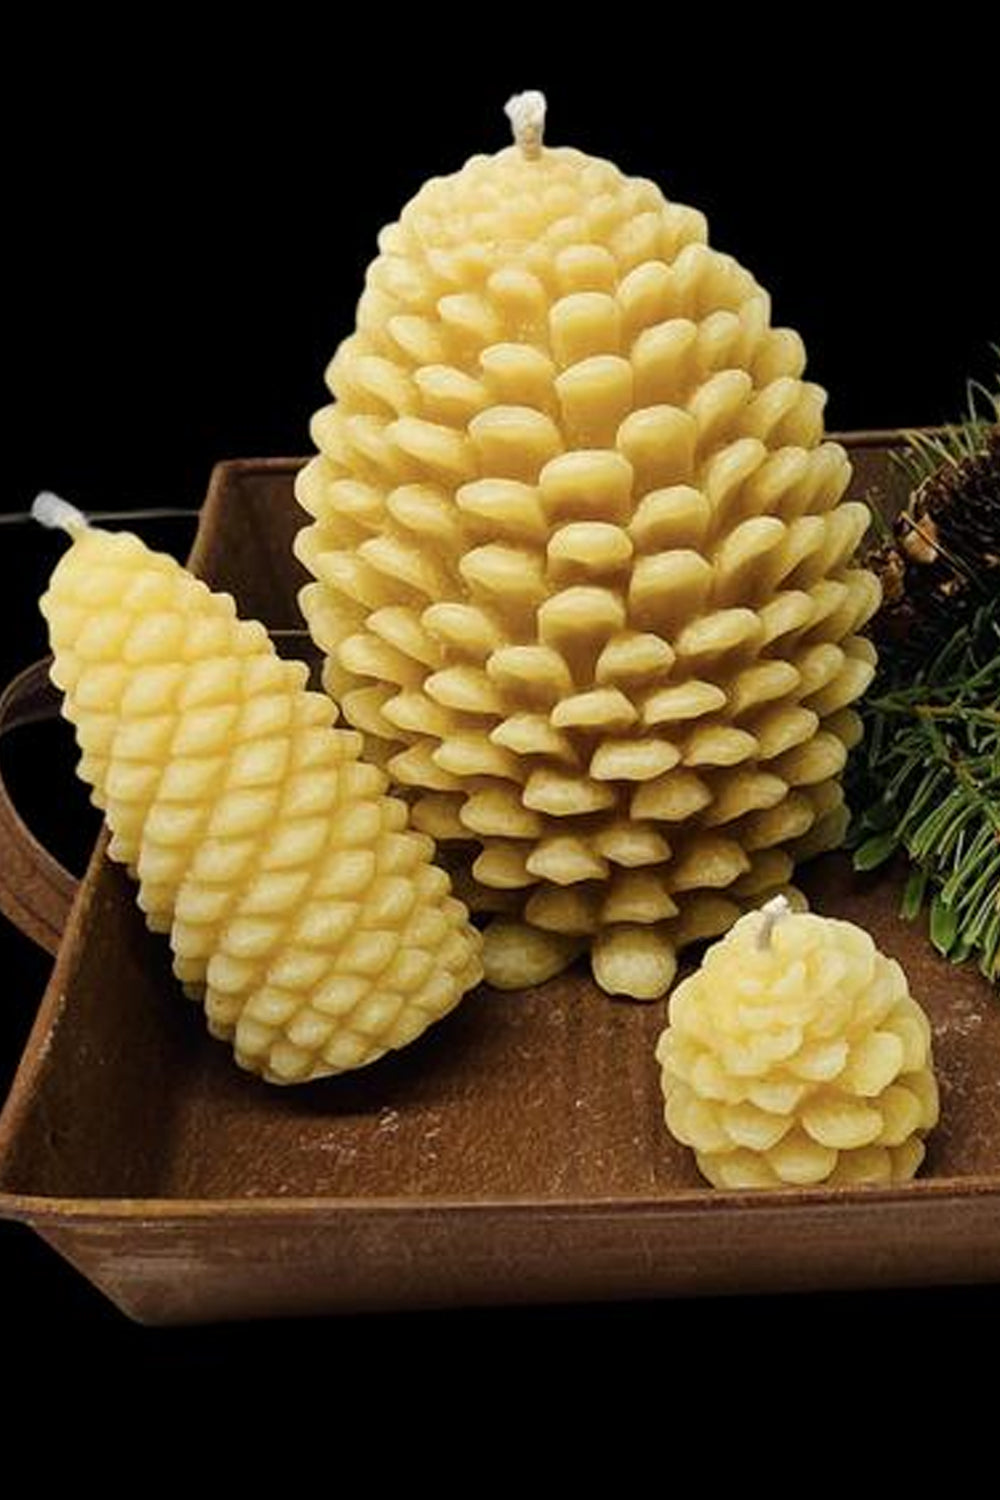 Beeswax Large Pine Cone Candle-pure beeswax - Lizzy Lane Farm Apothecary